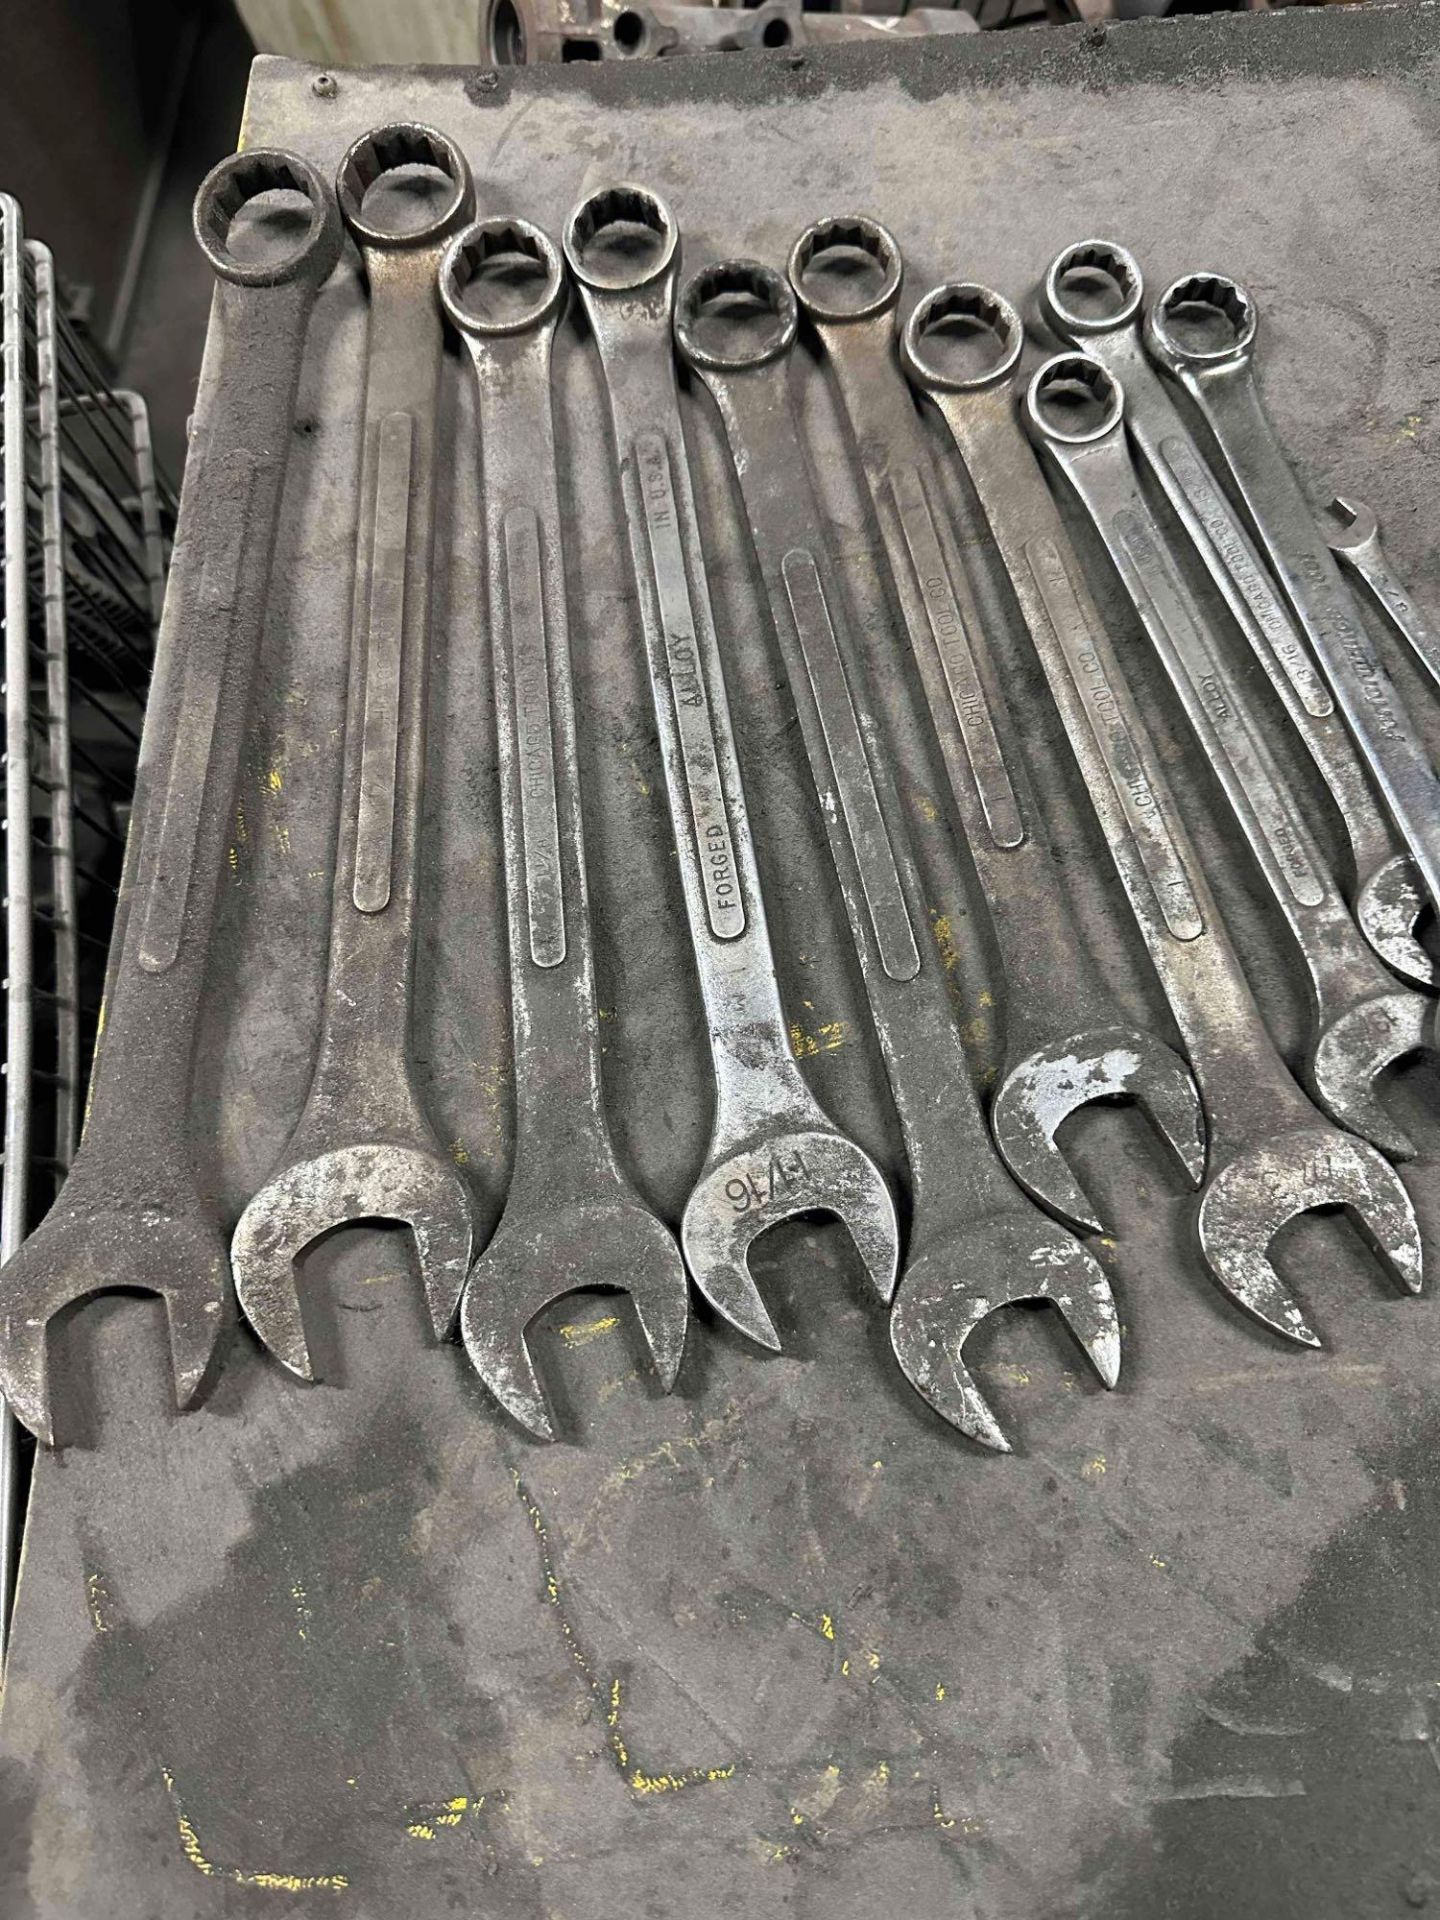 Box Wrenches, Punches, (1) Pipe Wrench, Files, Scrapers, Nips, Drill Bits & Scrappers Assorted